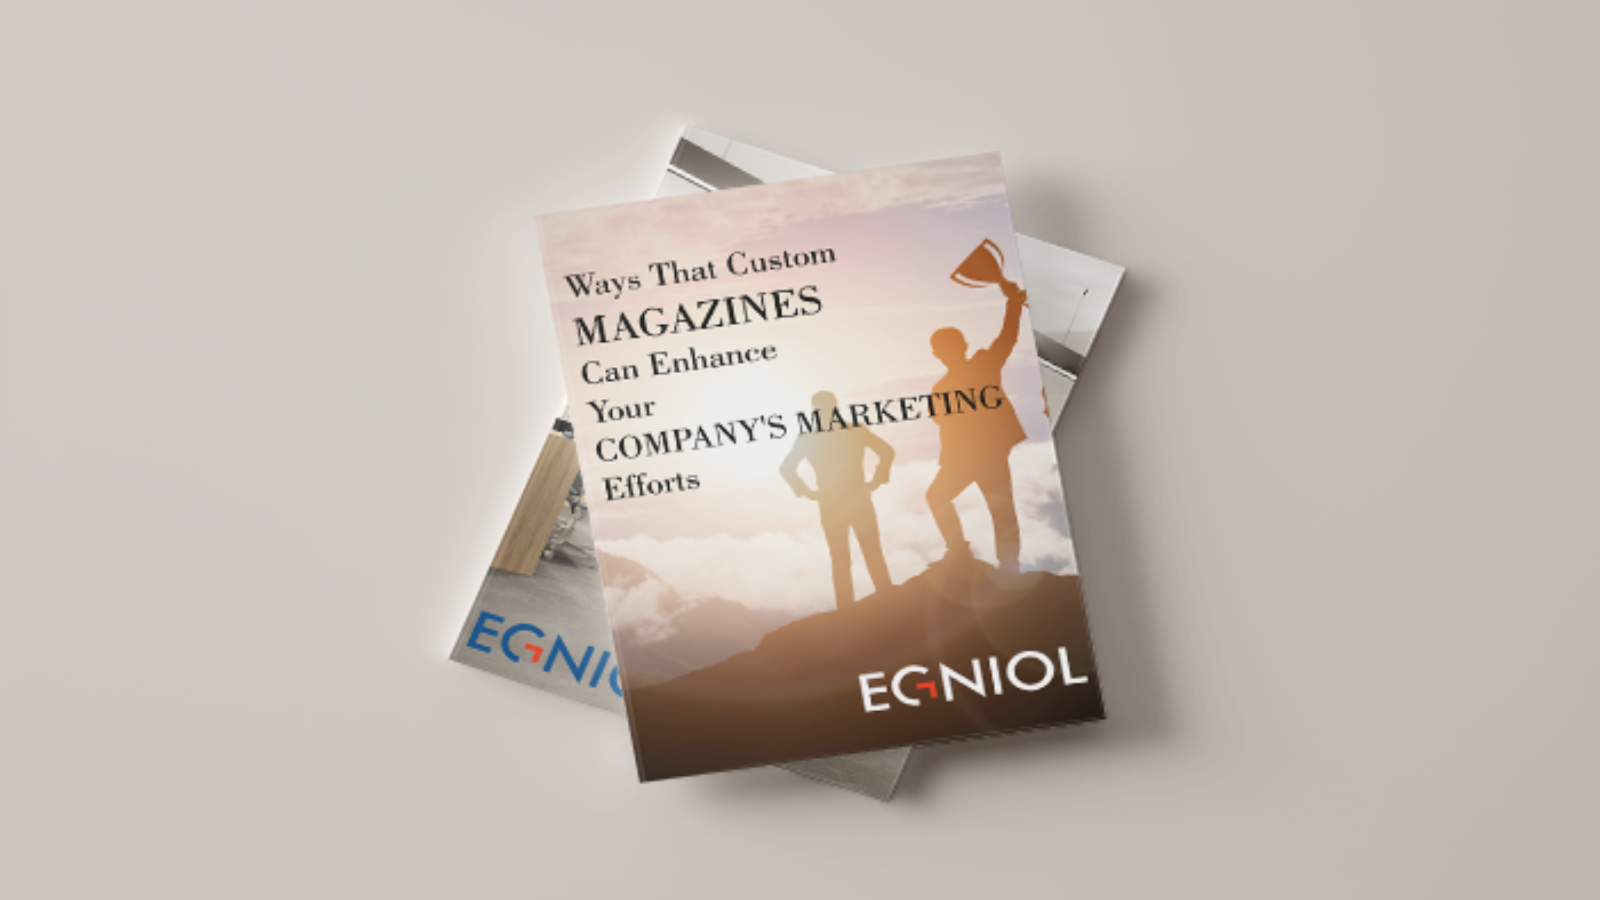 Ways That Custom Magazines Can Enhance Your Company's Marketing Efforts - By Egniol